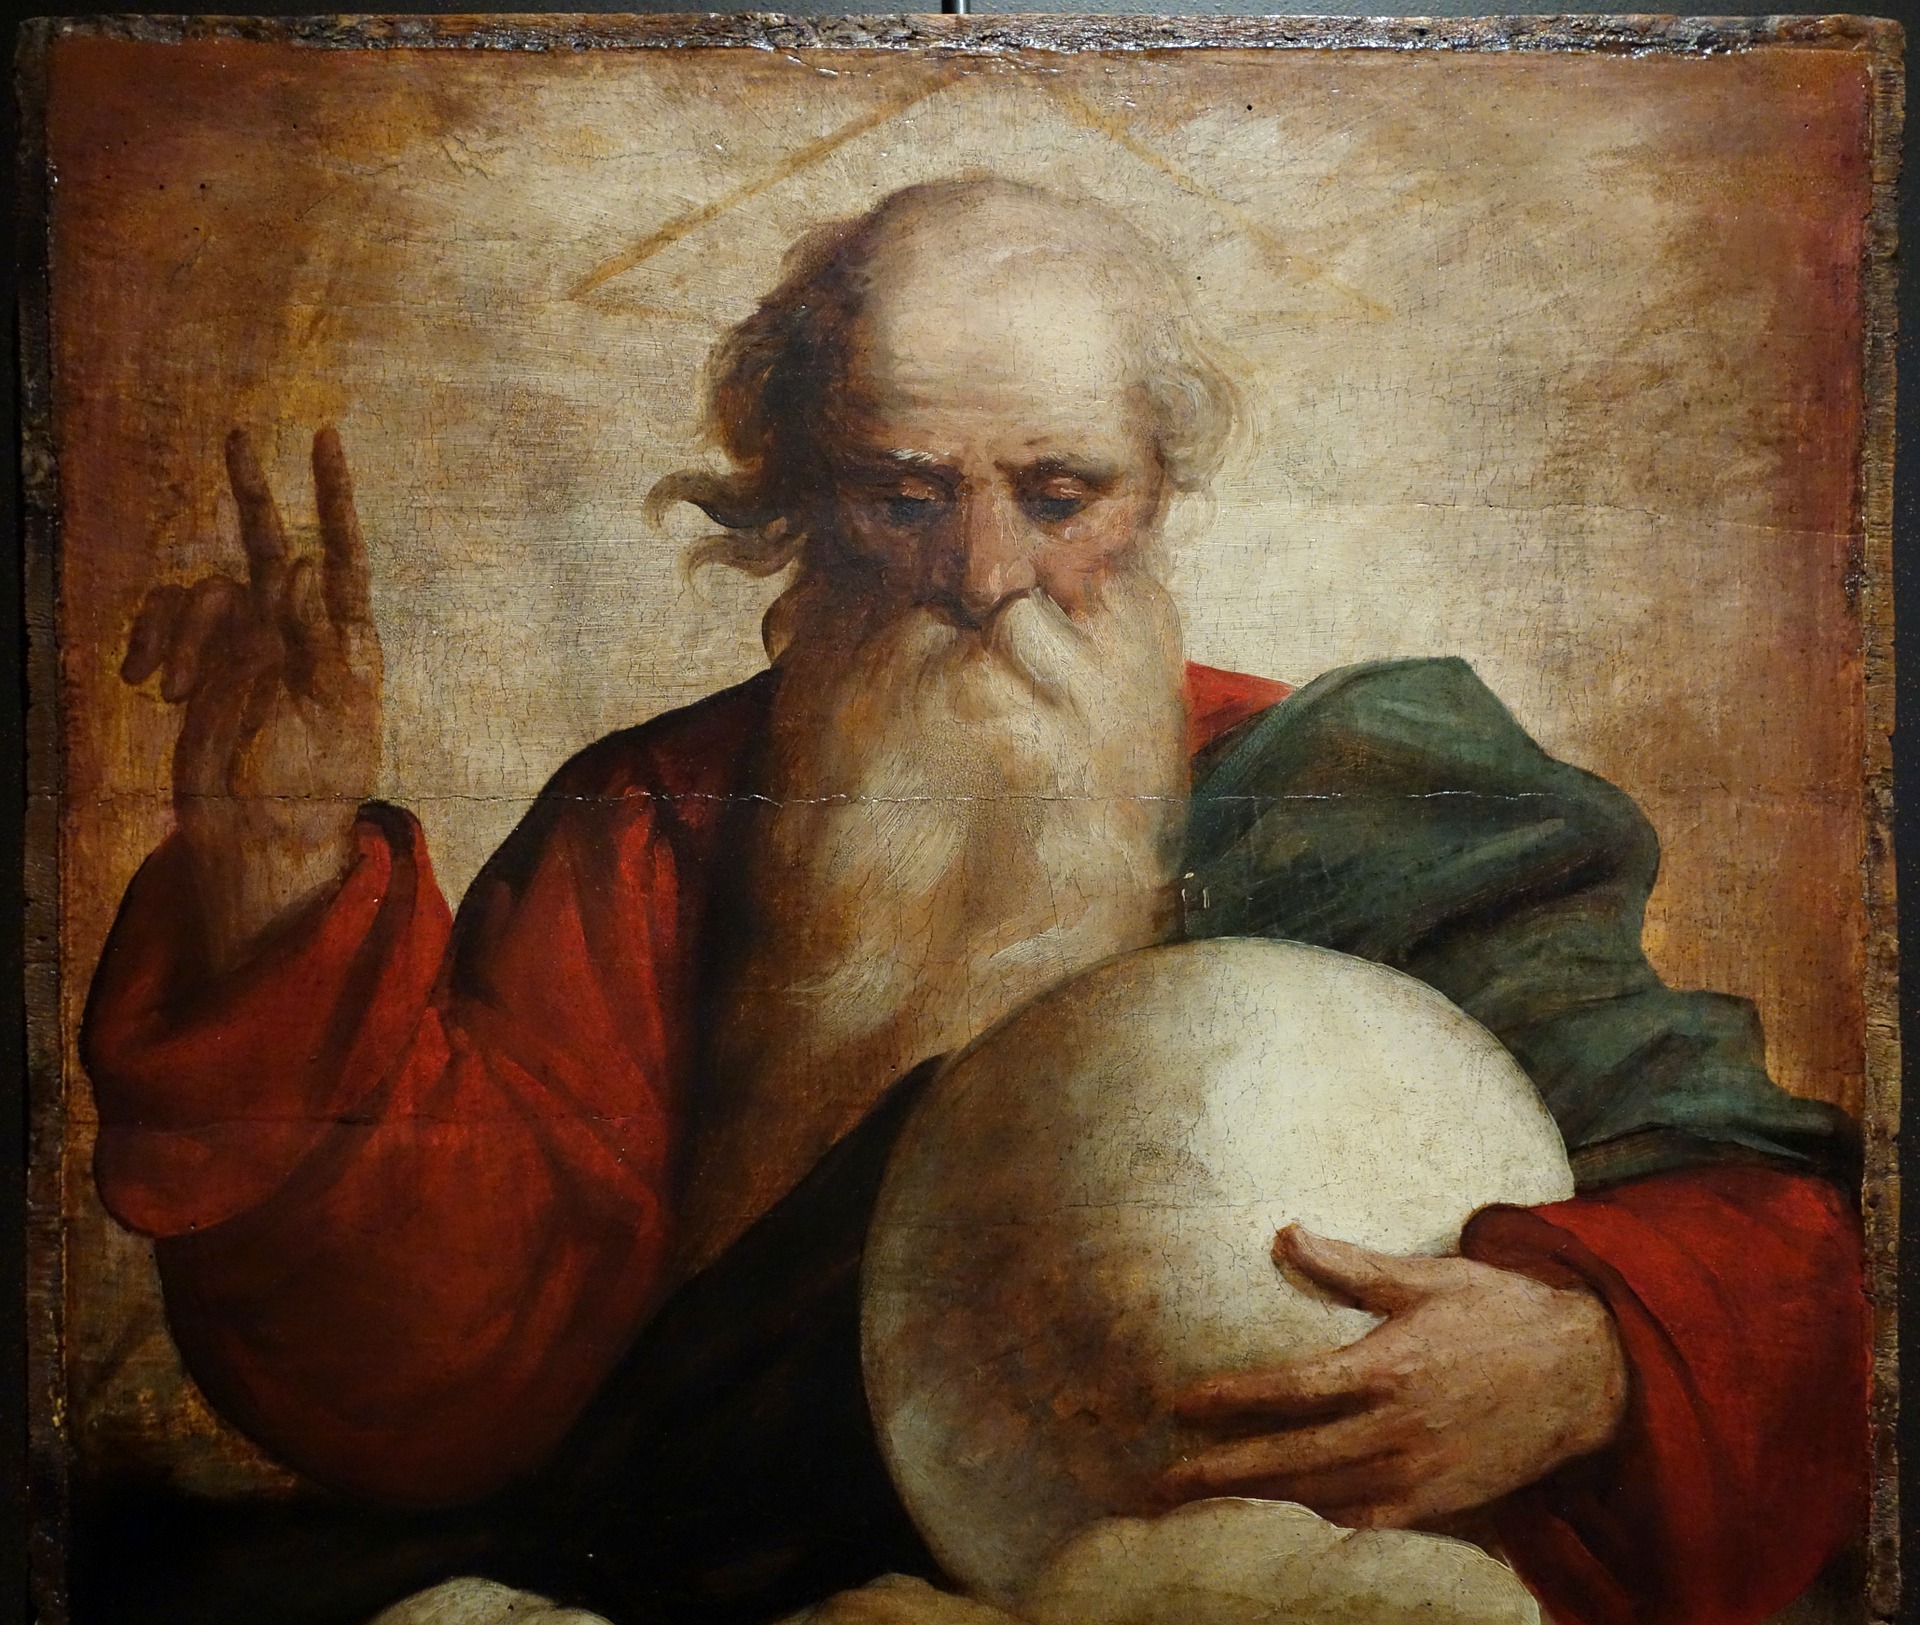 Apparently God is just some old dude with big, white balls.